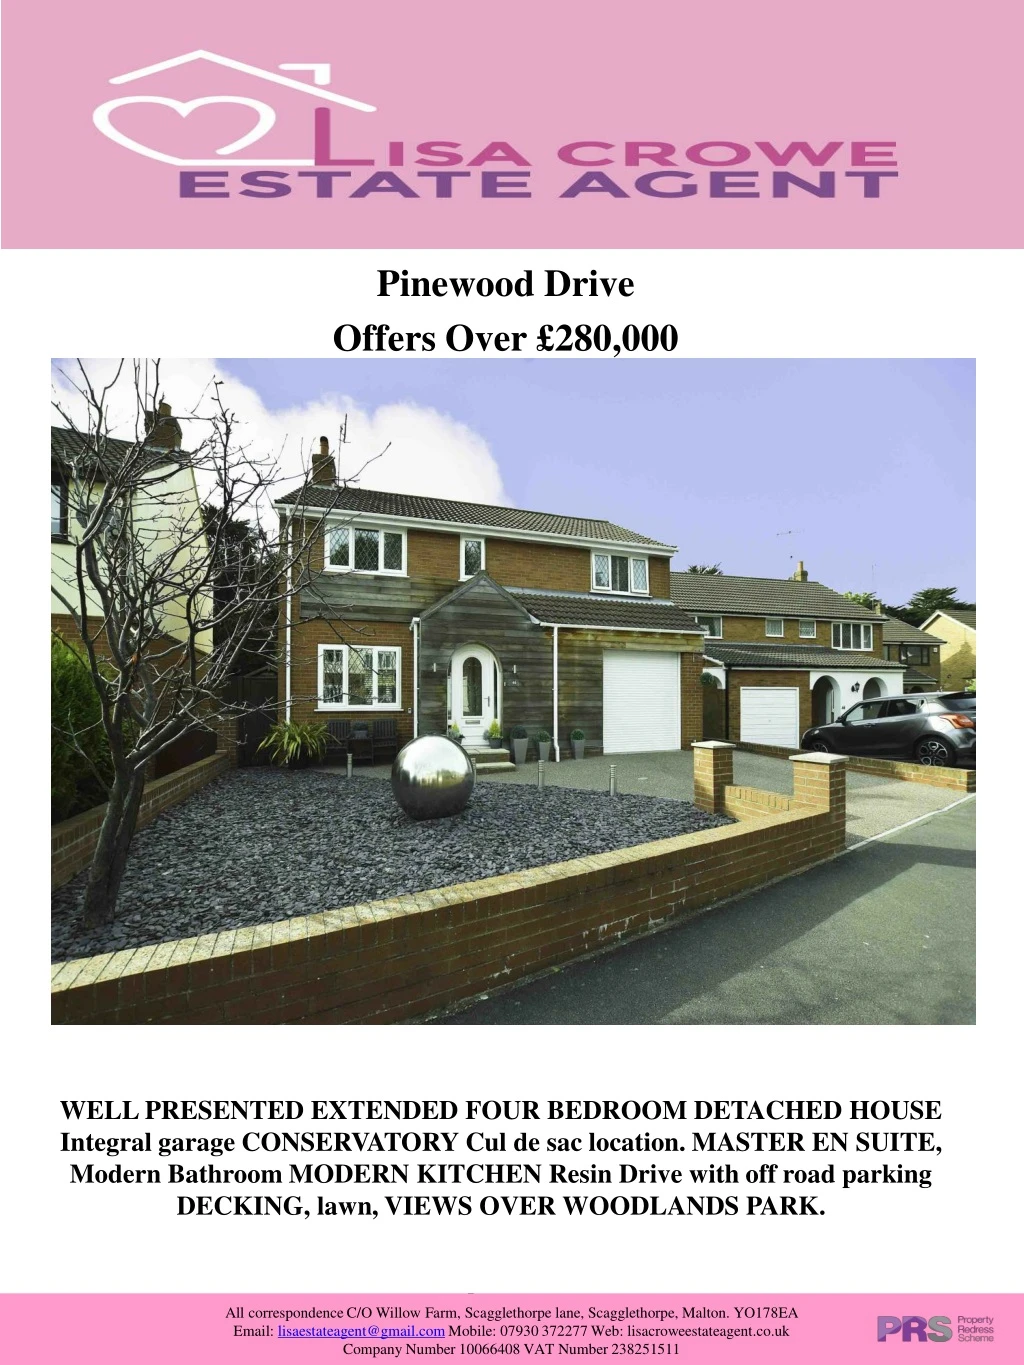 well presented extended four bedroom detached